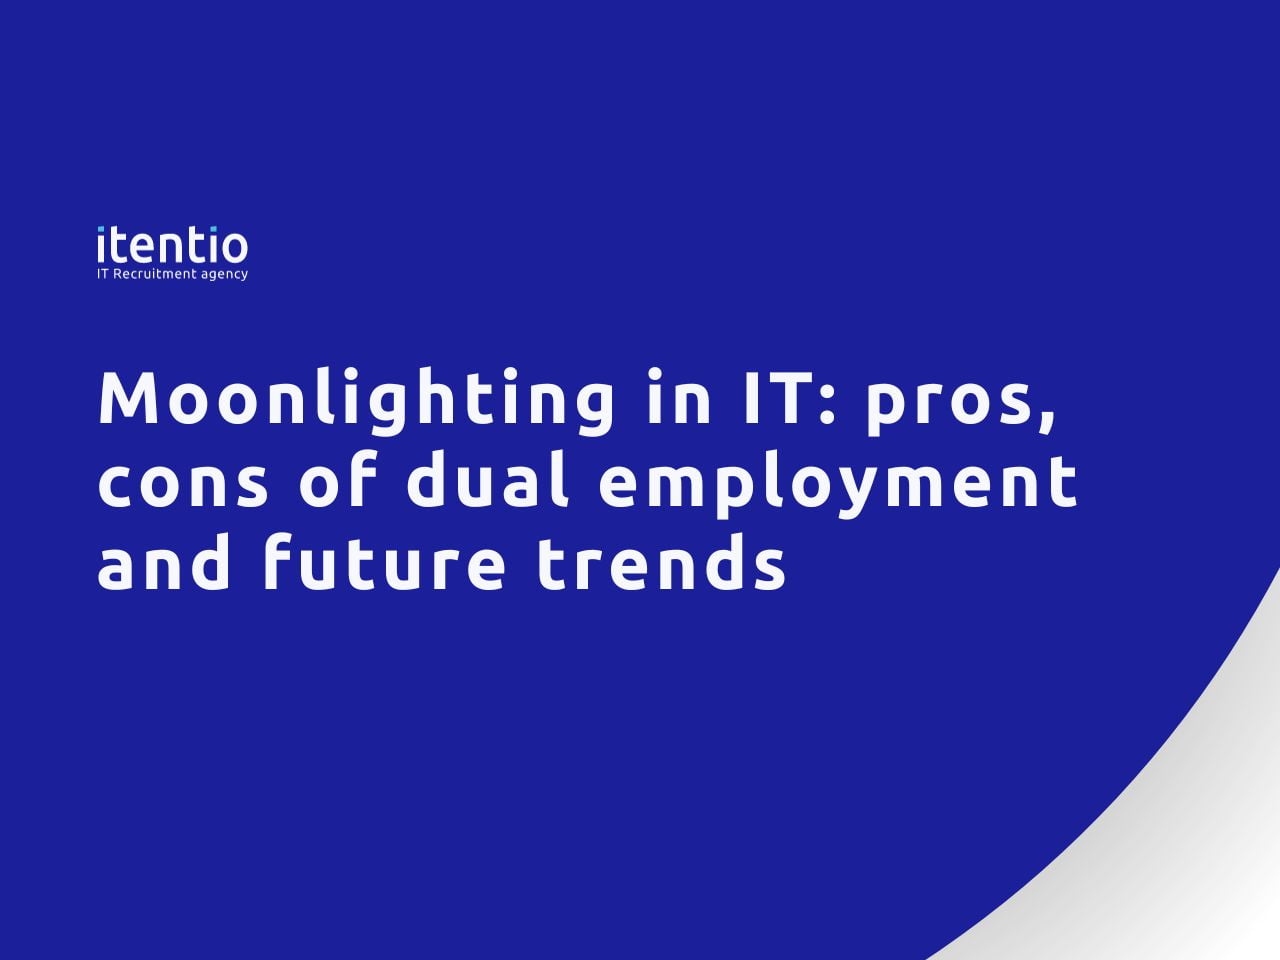 Moonlighting in IT: pros, cons of dual employment and future trends